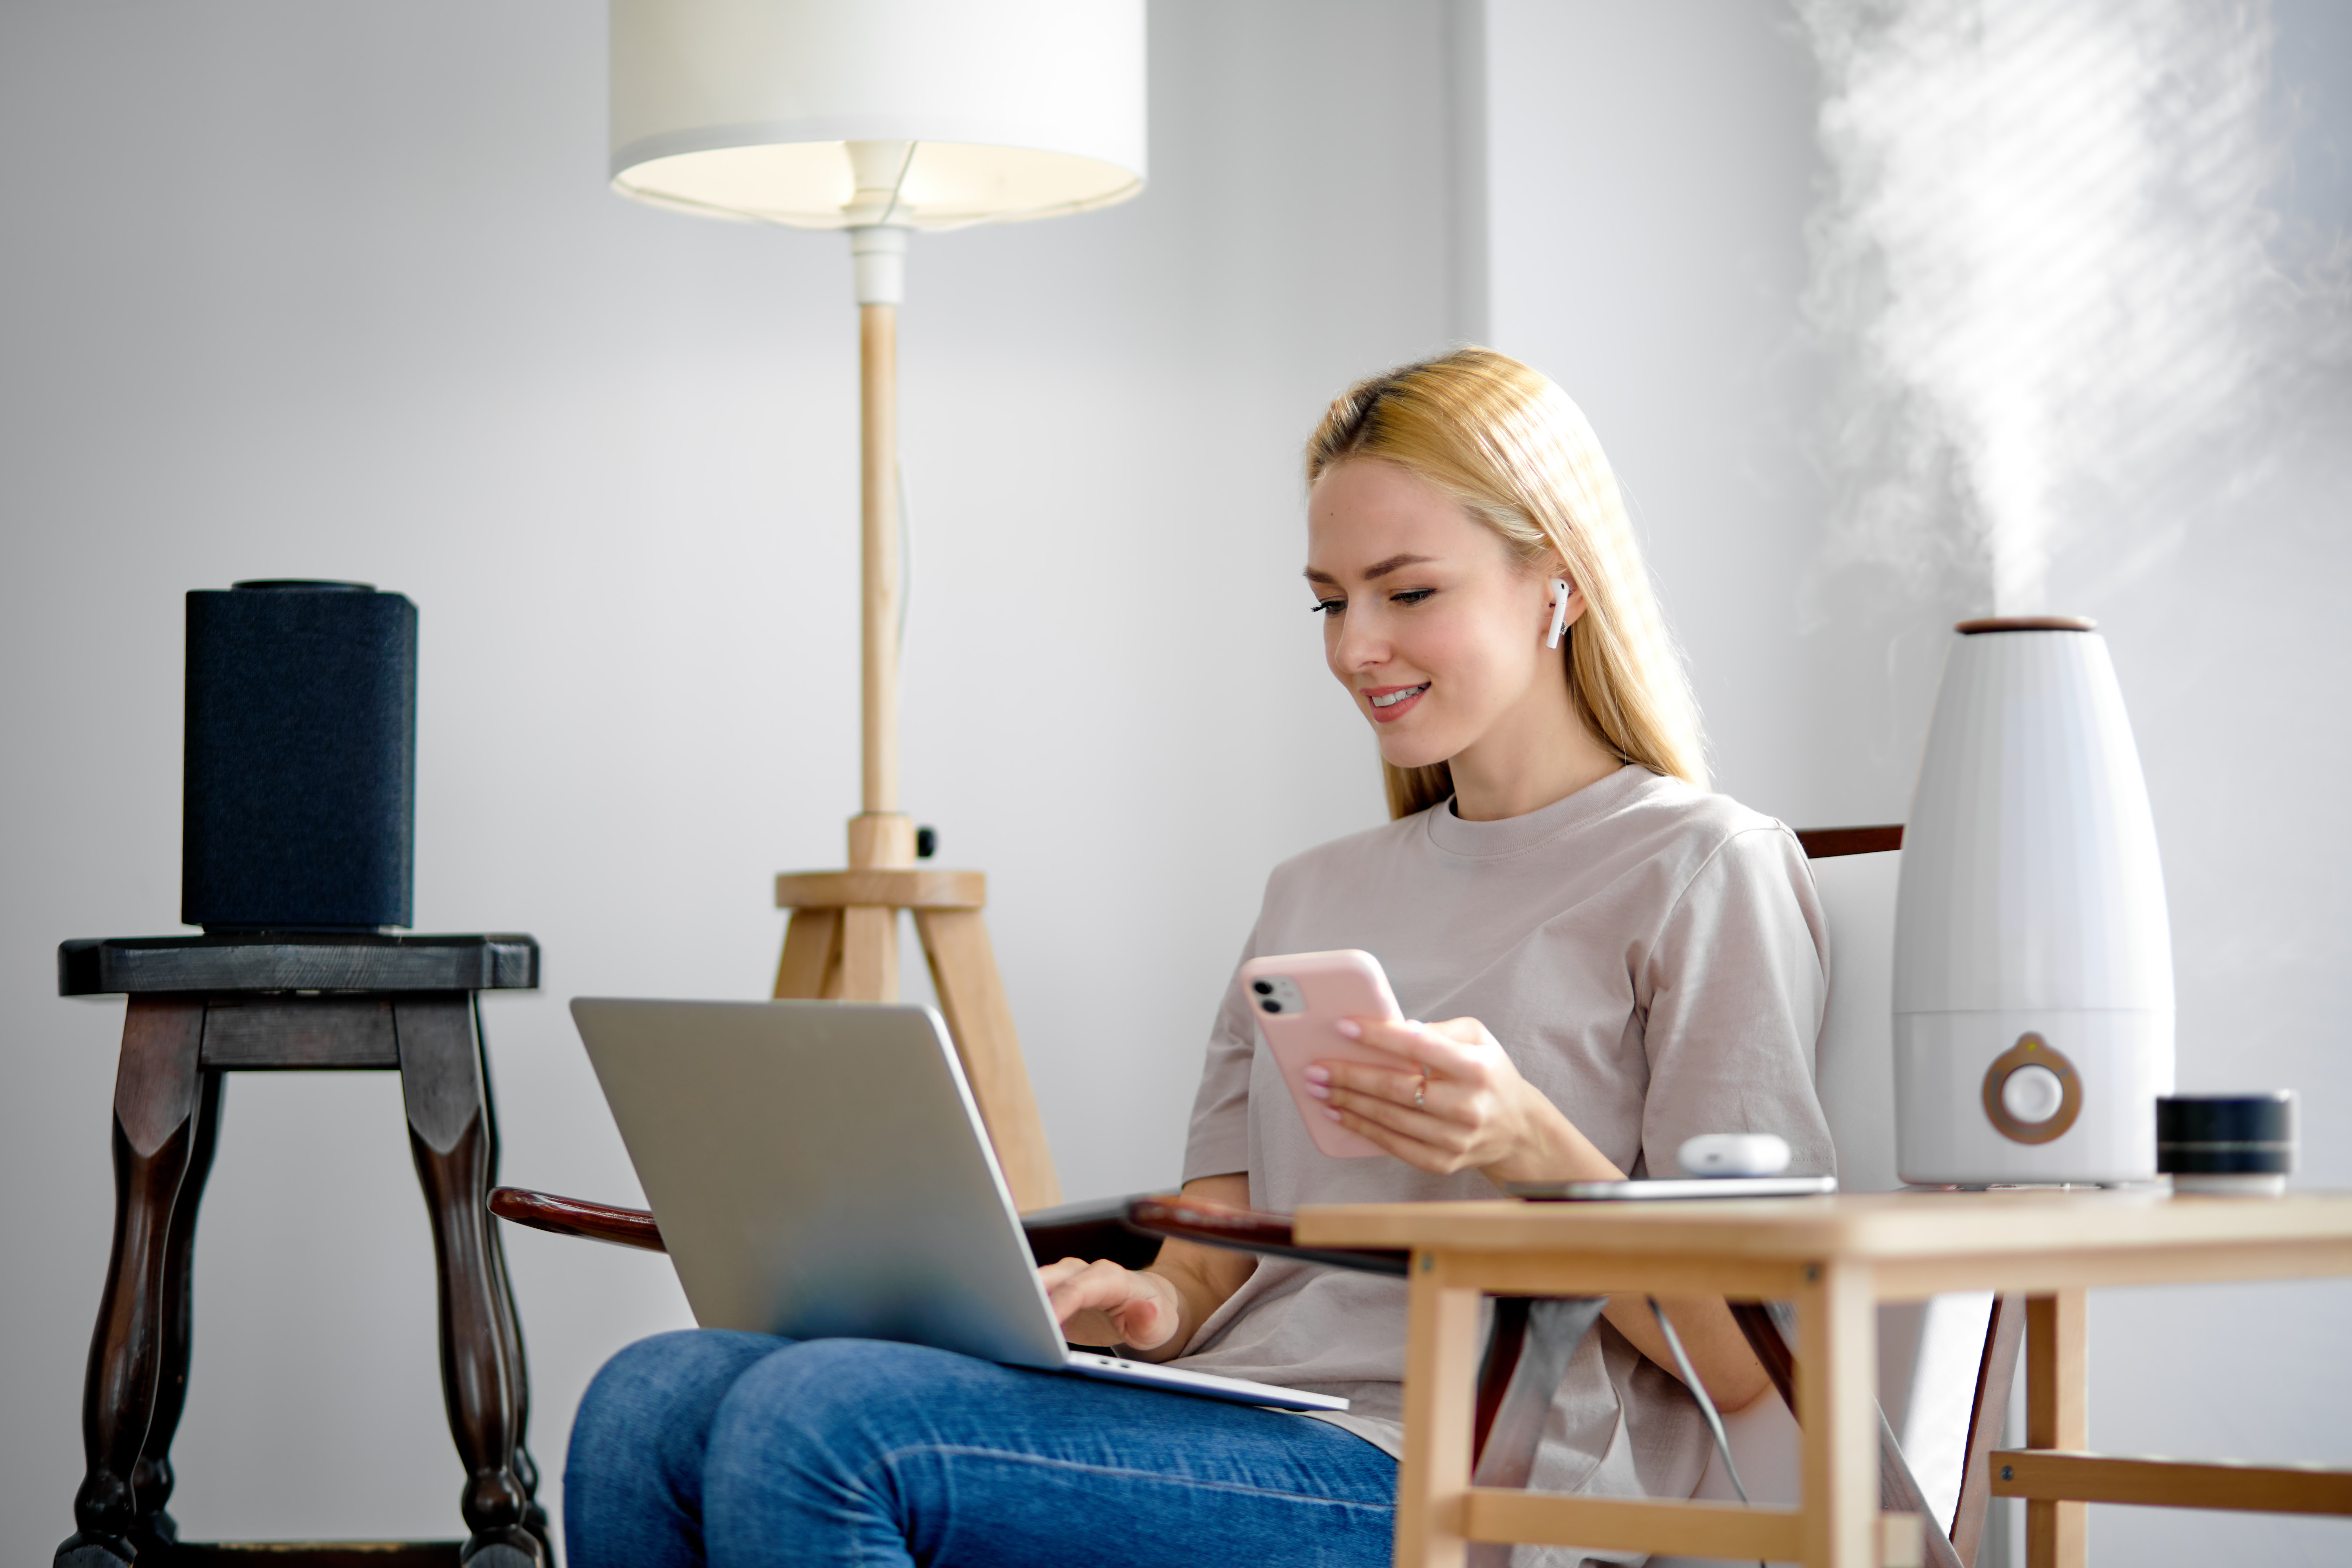 Woman sitting in a chair on her smartphone and laptop with a humidifier going